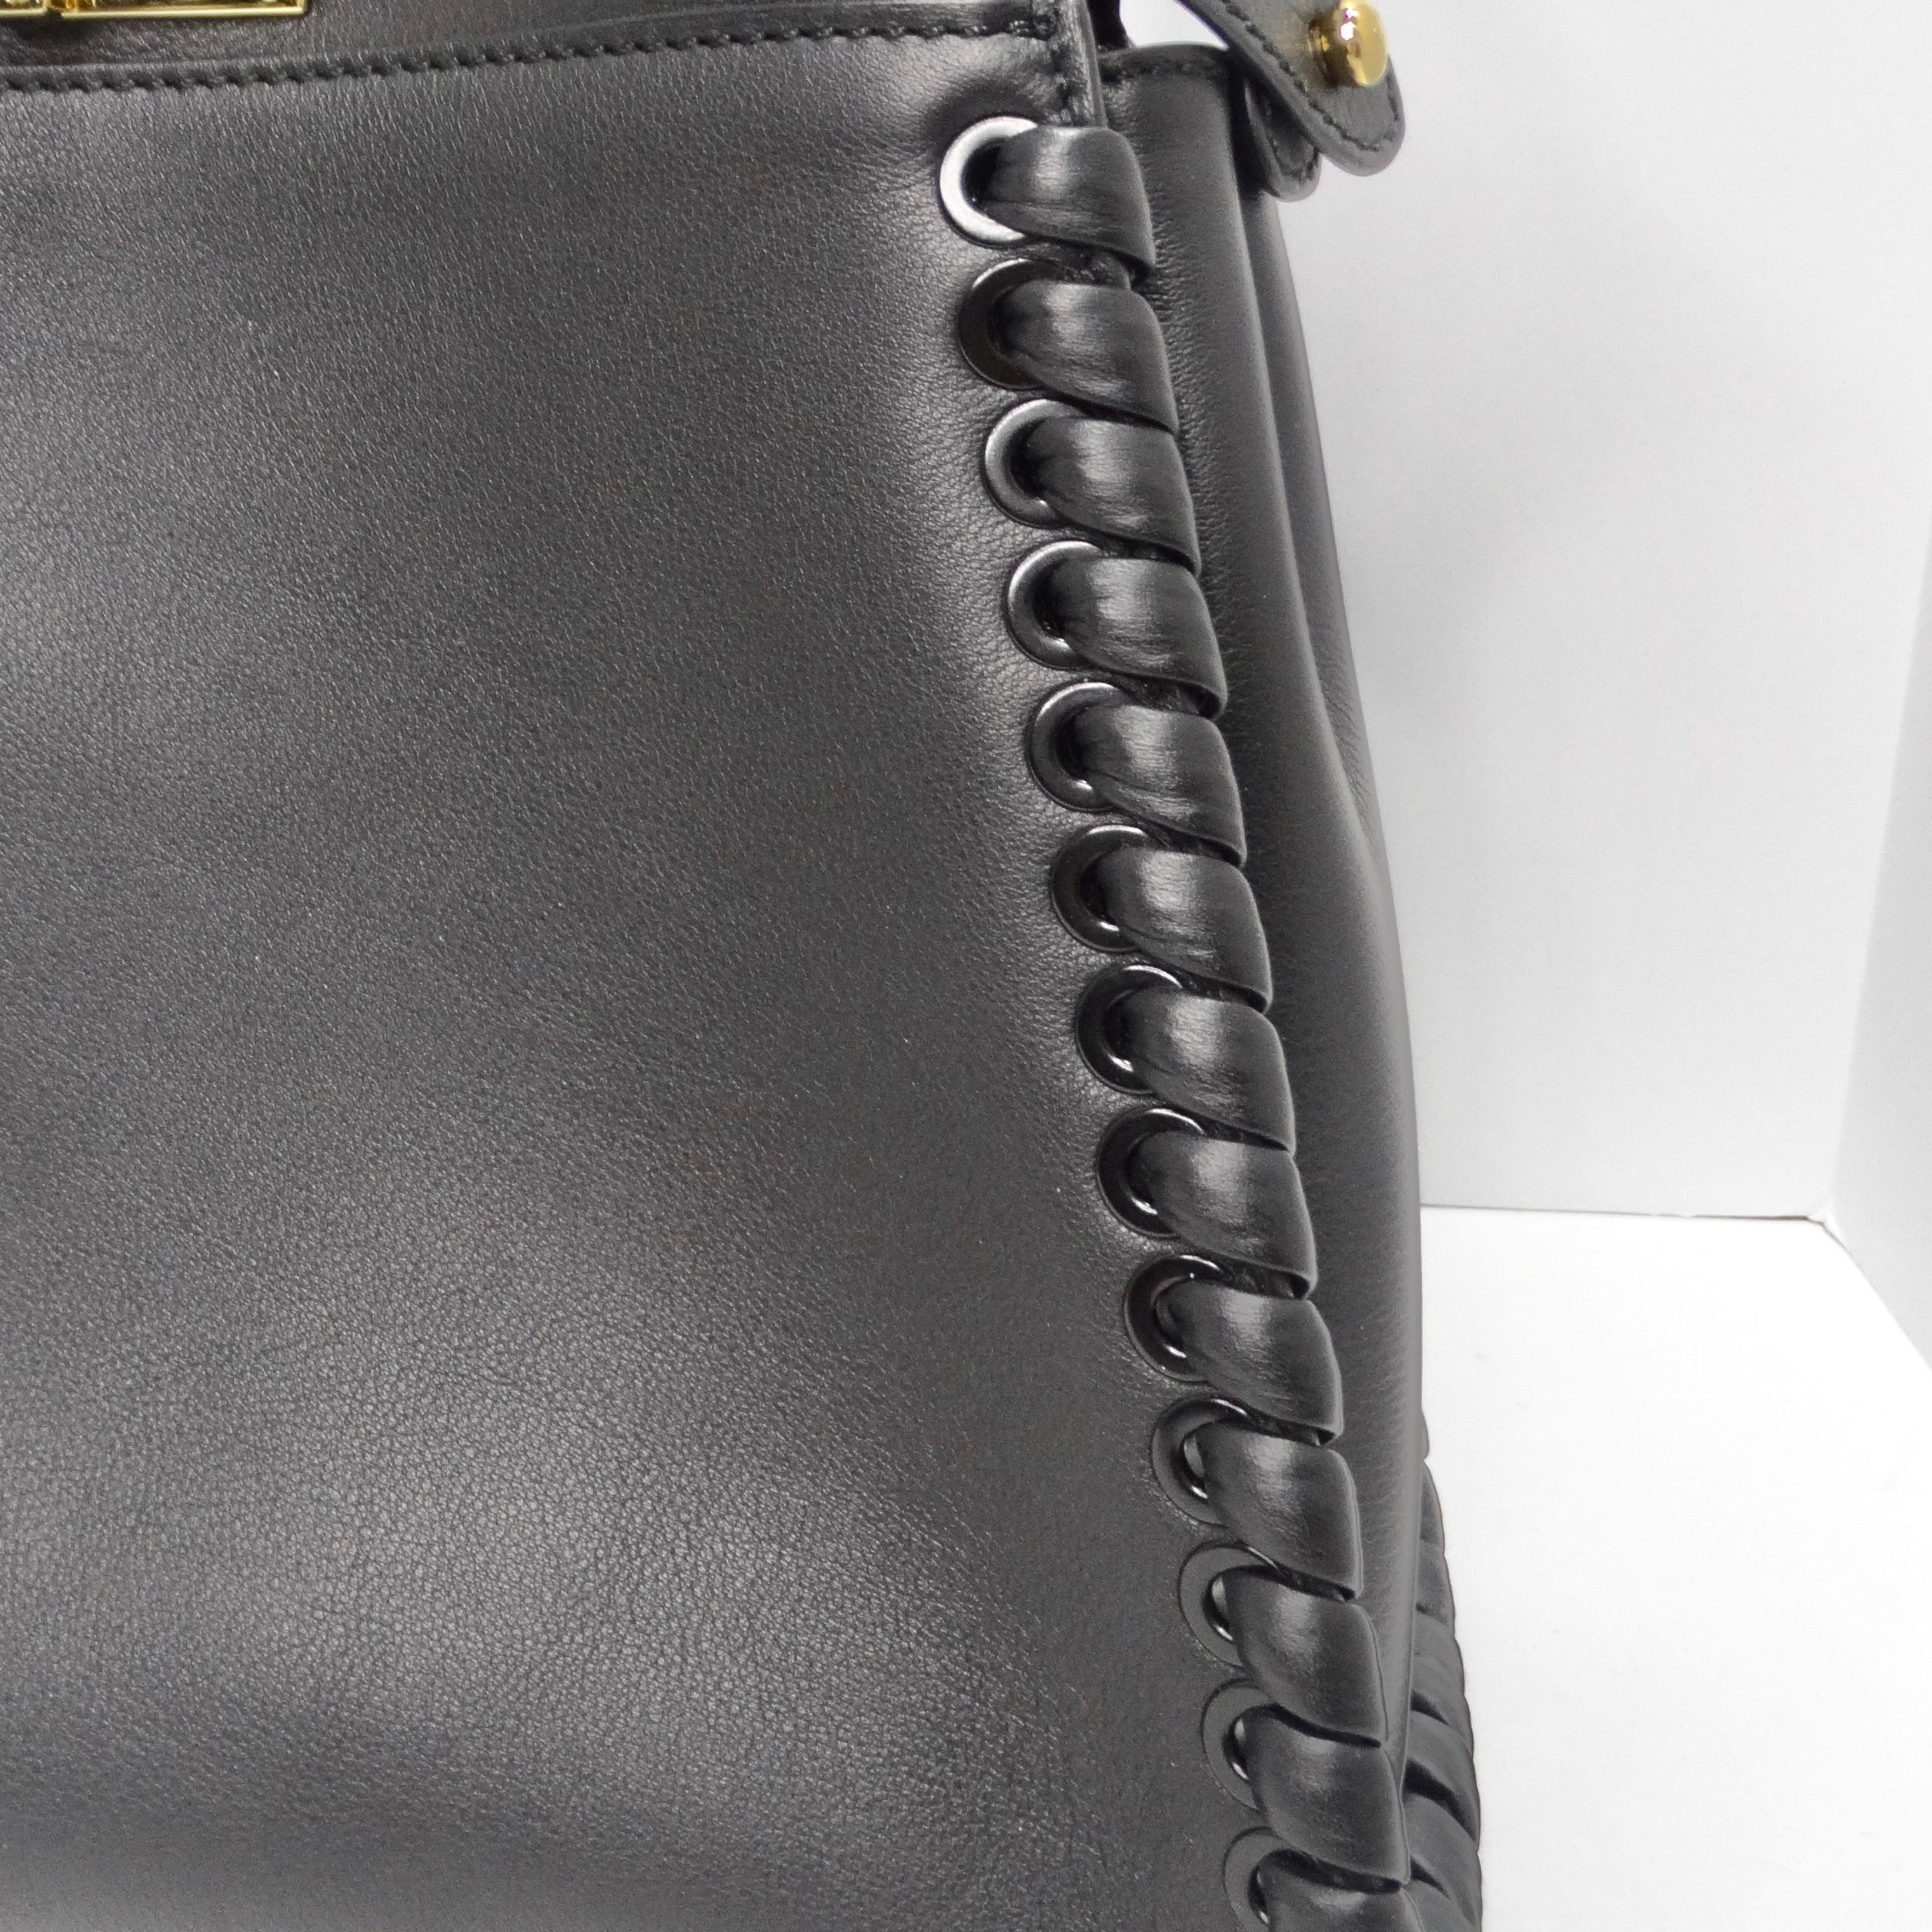 Indulge in the epitome of luxury and craftsmanship with the Fendi Peekaboo Medium Whipstitch Shoulder Bag. Meticulously crafted from sumptuous leather, this exquisite bag showcases the art of whipstitched details and boasts a convenient top handle